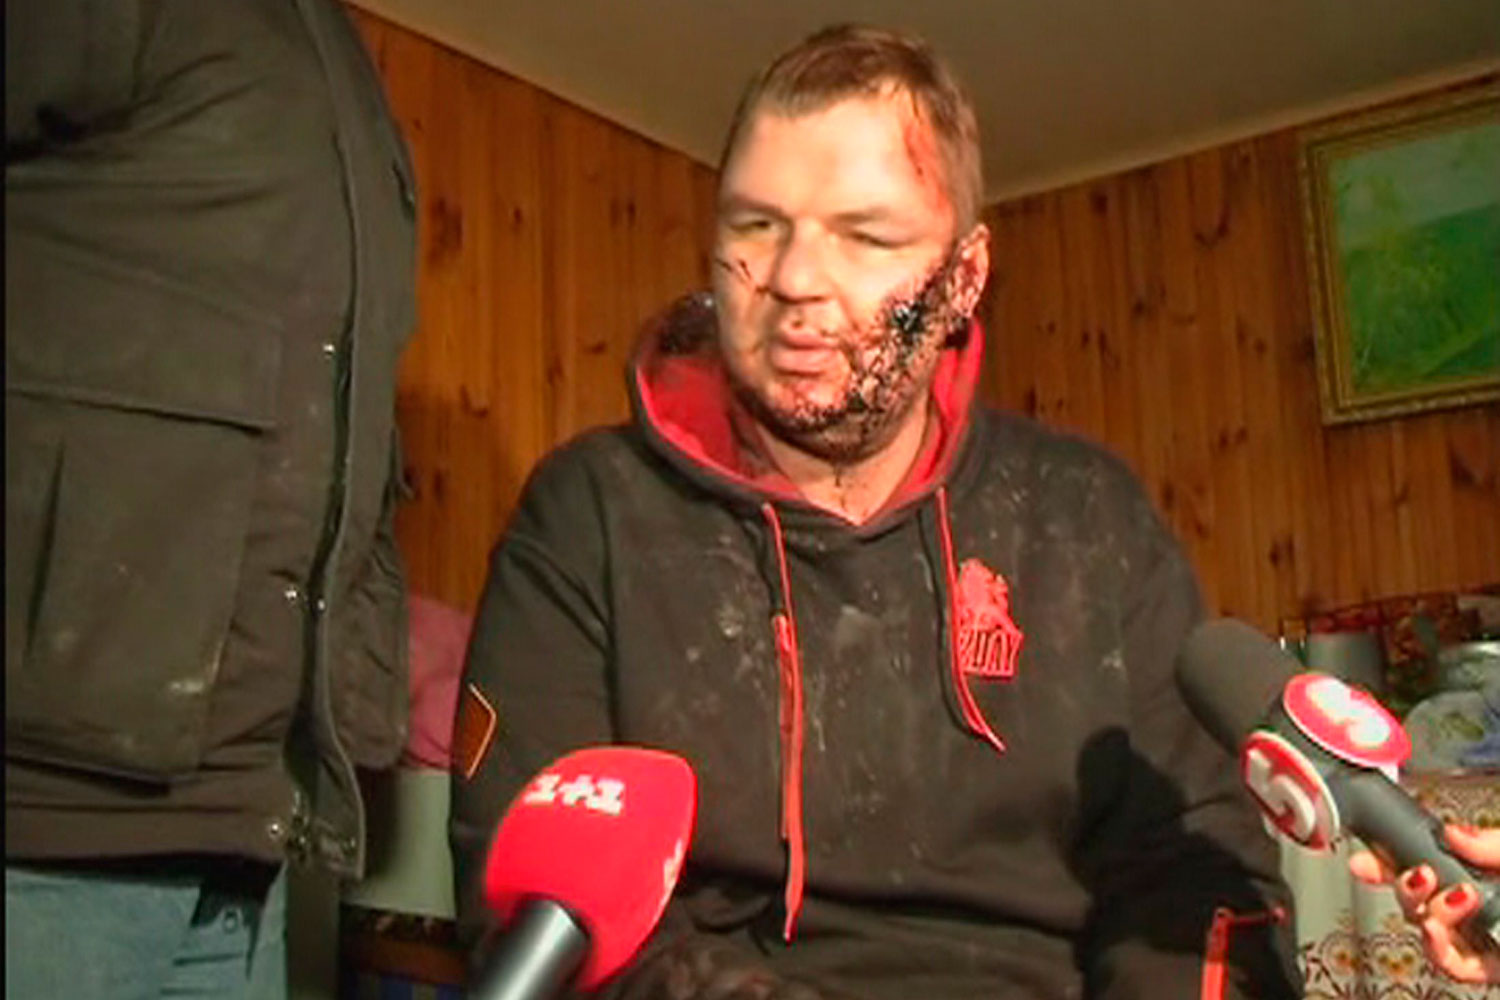 Dmytro Bulatov, 35, one of the leaders of anti-government protest motorcades called 'Automaidan', speaks to journalists after being found near Kiev, Jan. 30, 2014. (Reuters)